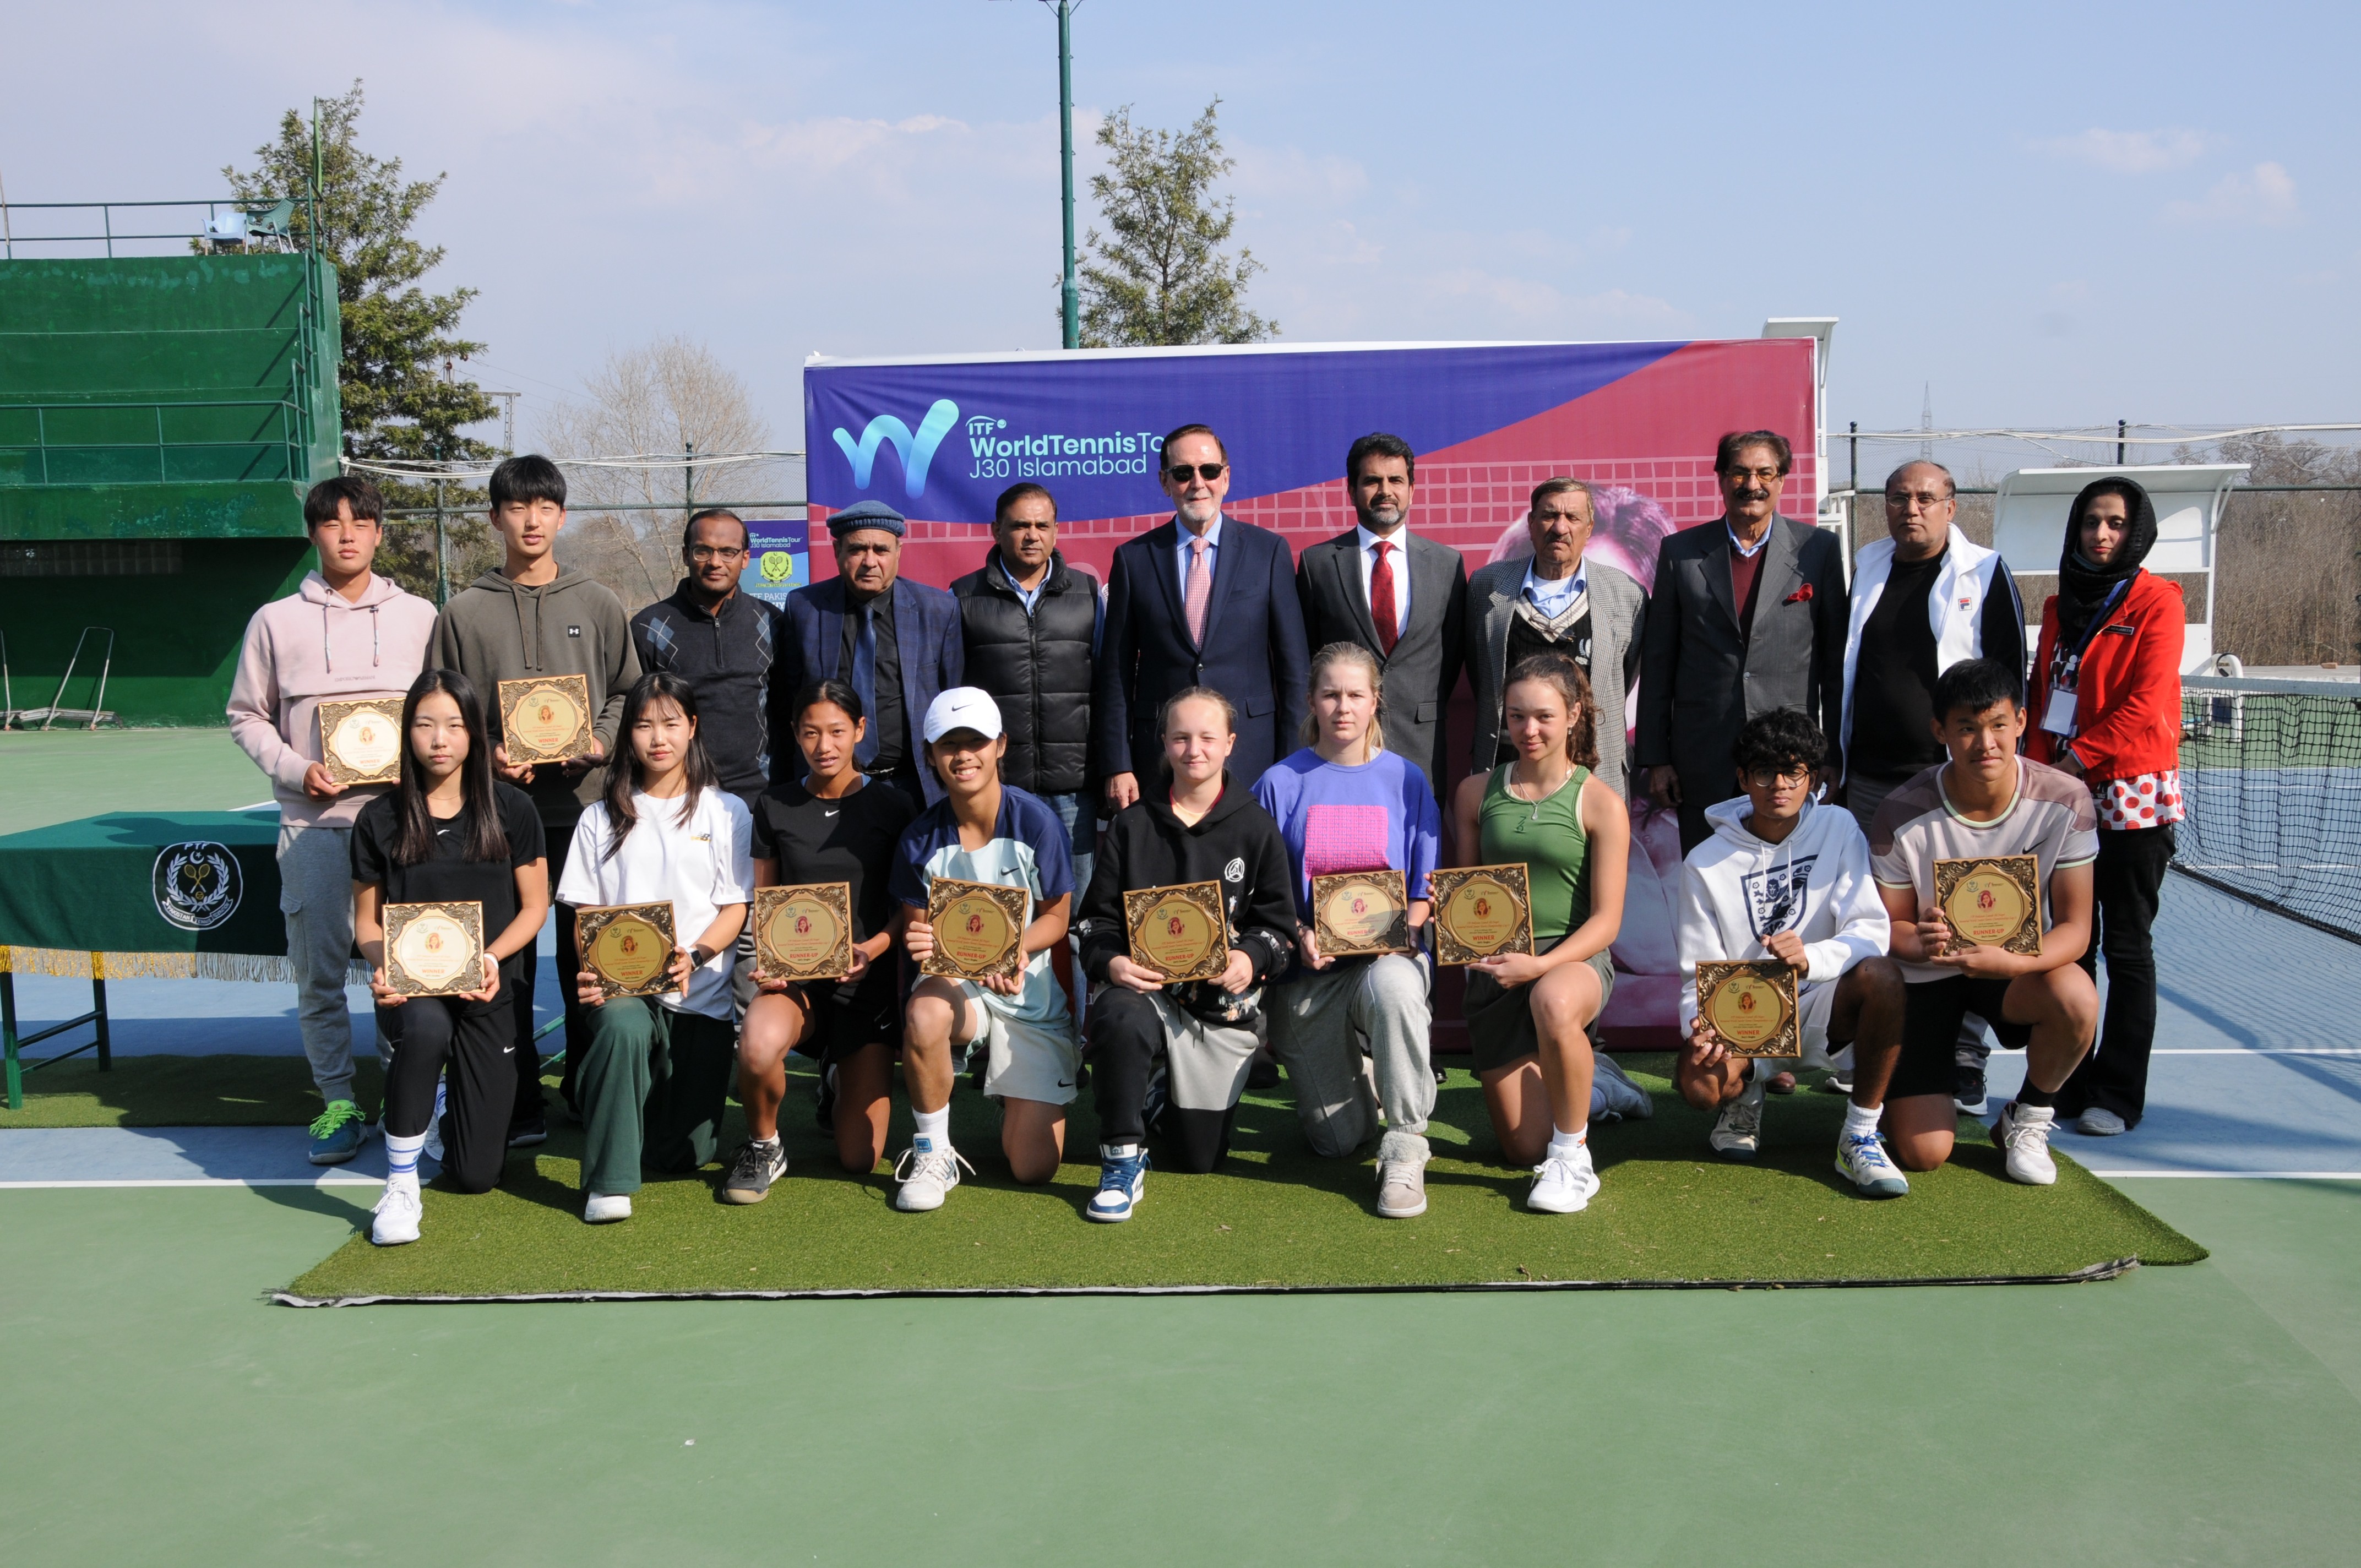 A group photo of winning tennis players with the chief guests